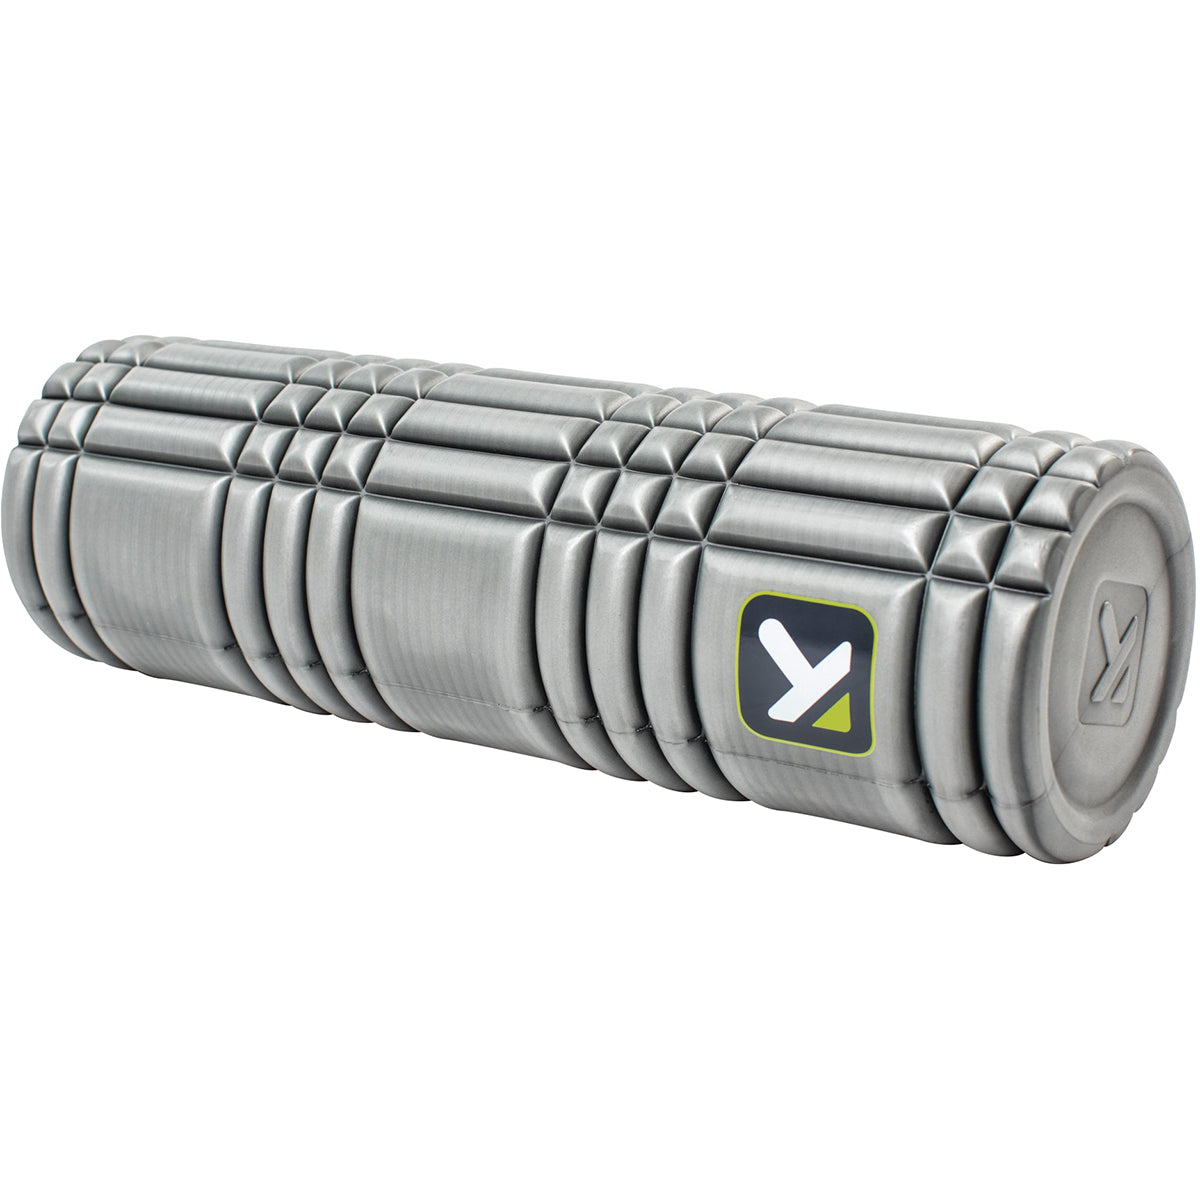 TriggerPoint 18" Solid Core Foam Roller - Gray TriggerPoint